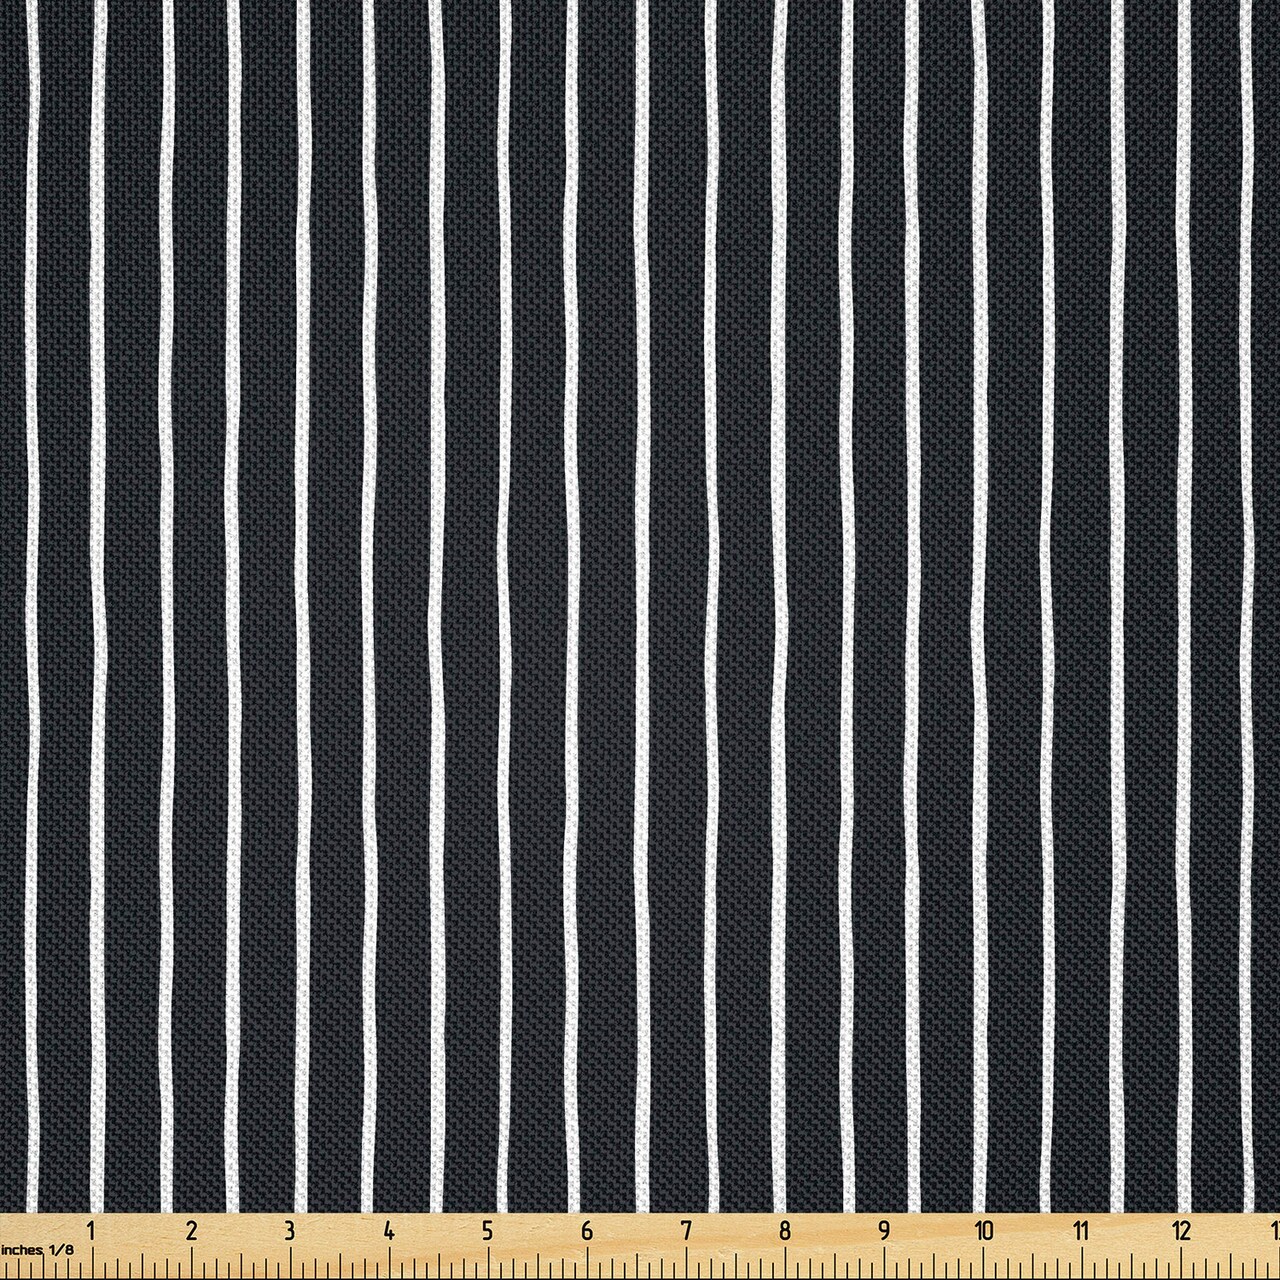 Ambesonne Pinstripe Fabric by The Yard, Monochrome Black and White Design White Thin Uneven Lines on Dark Backdrop, Decorative Satin Fabric for Home Textiles and Crafts, 5 Yards, Black White